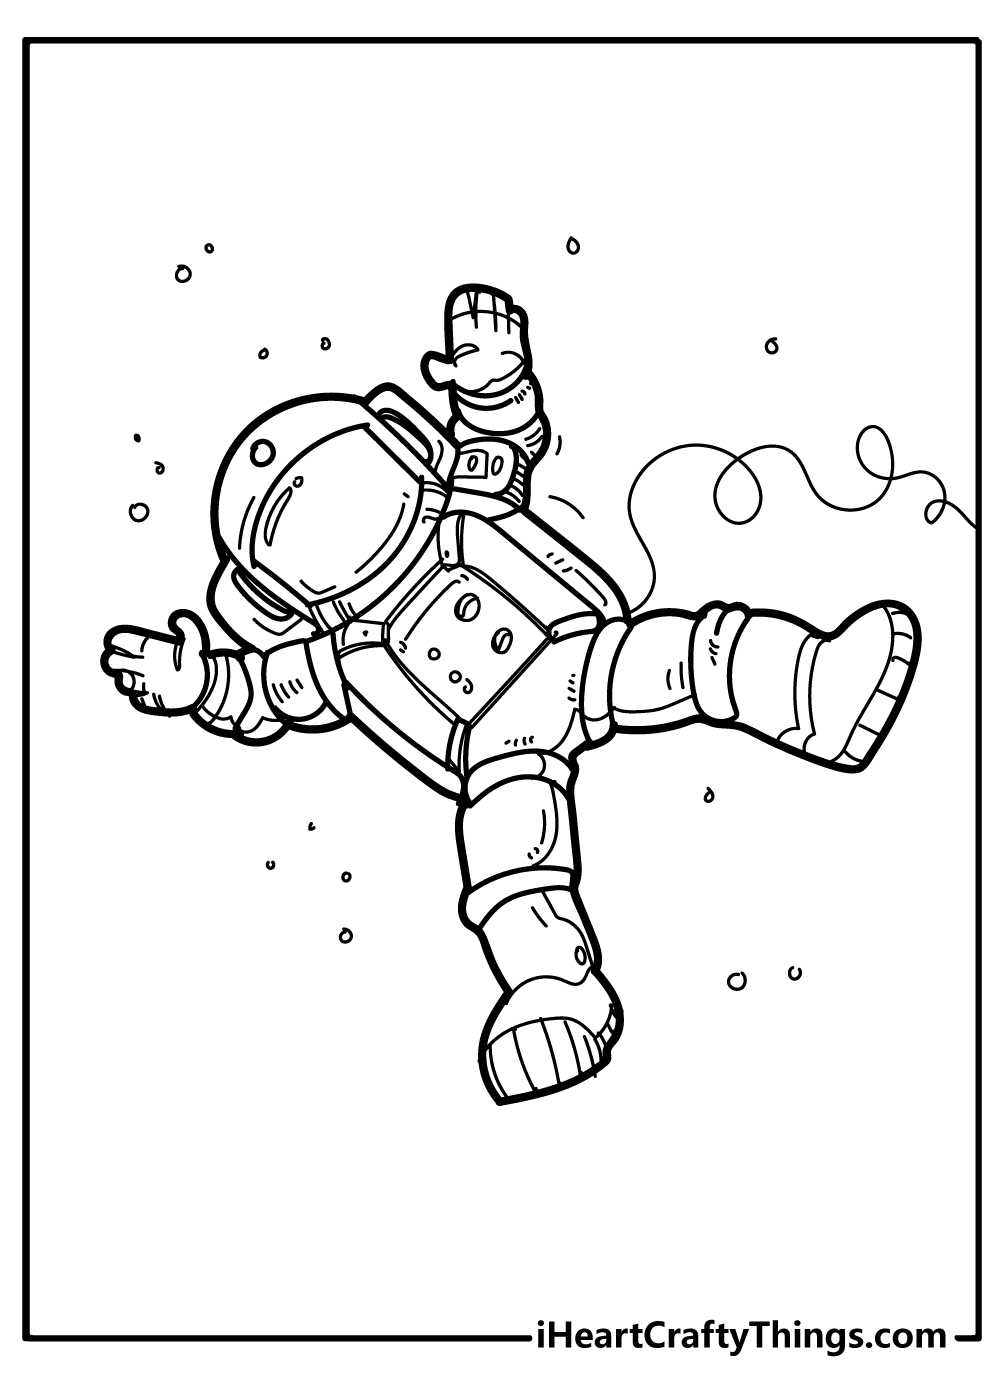 Astronaut Coloring Pages for adults free printable